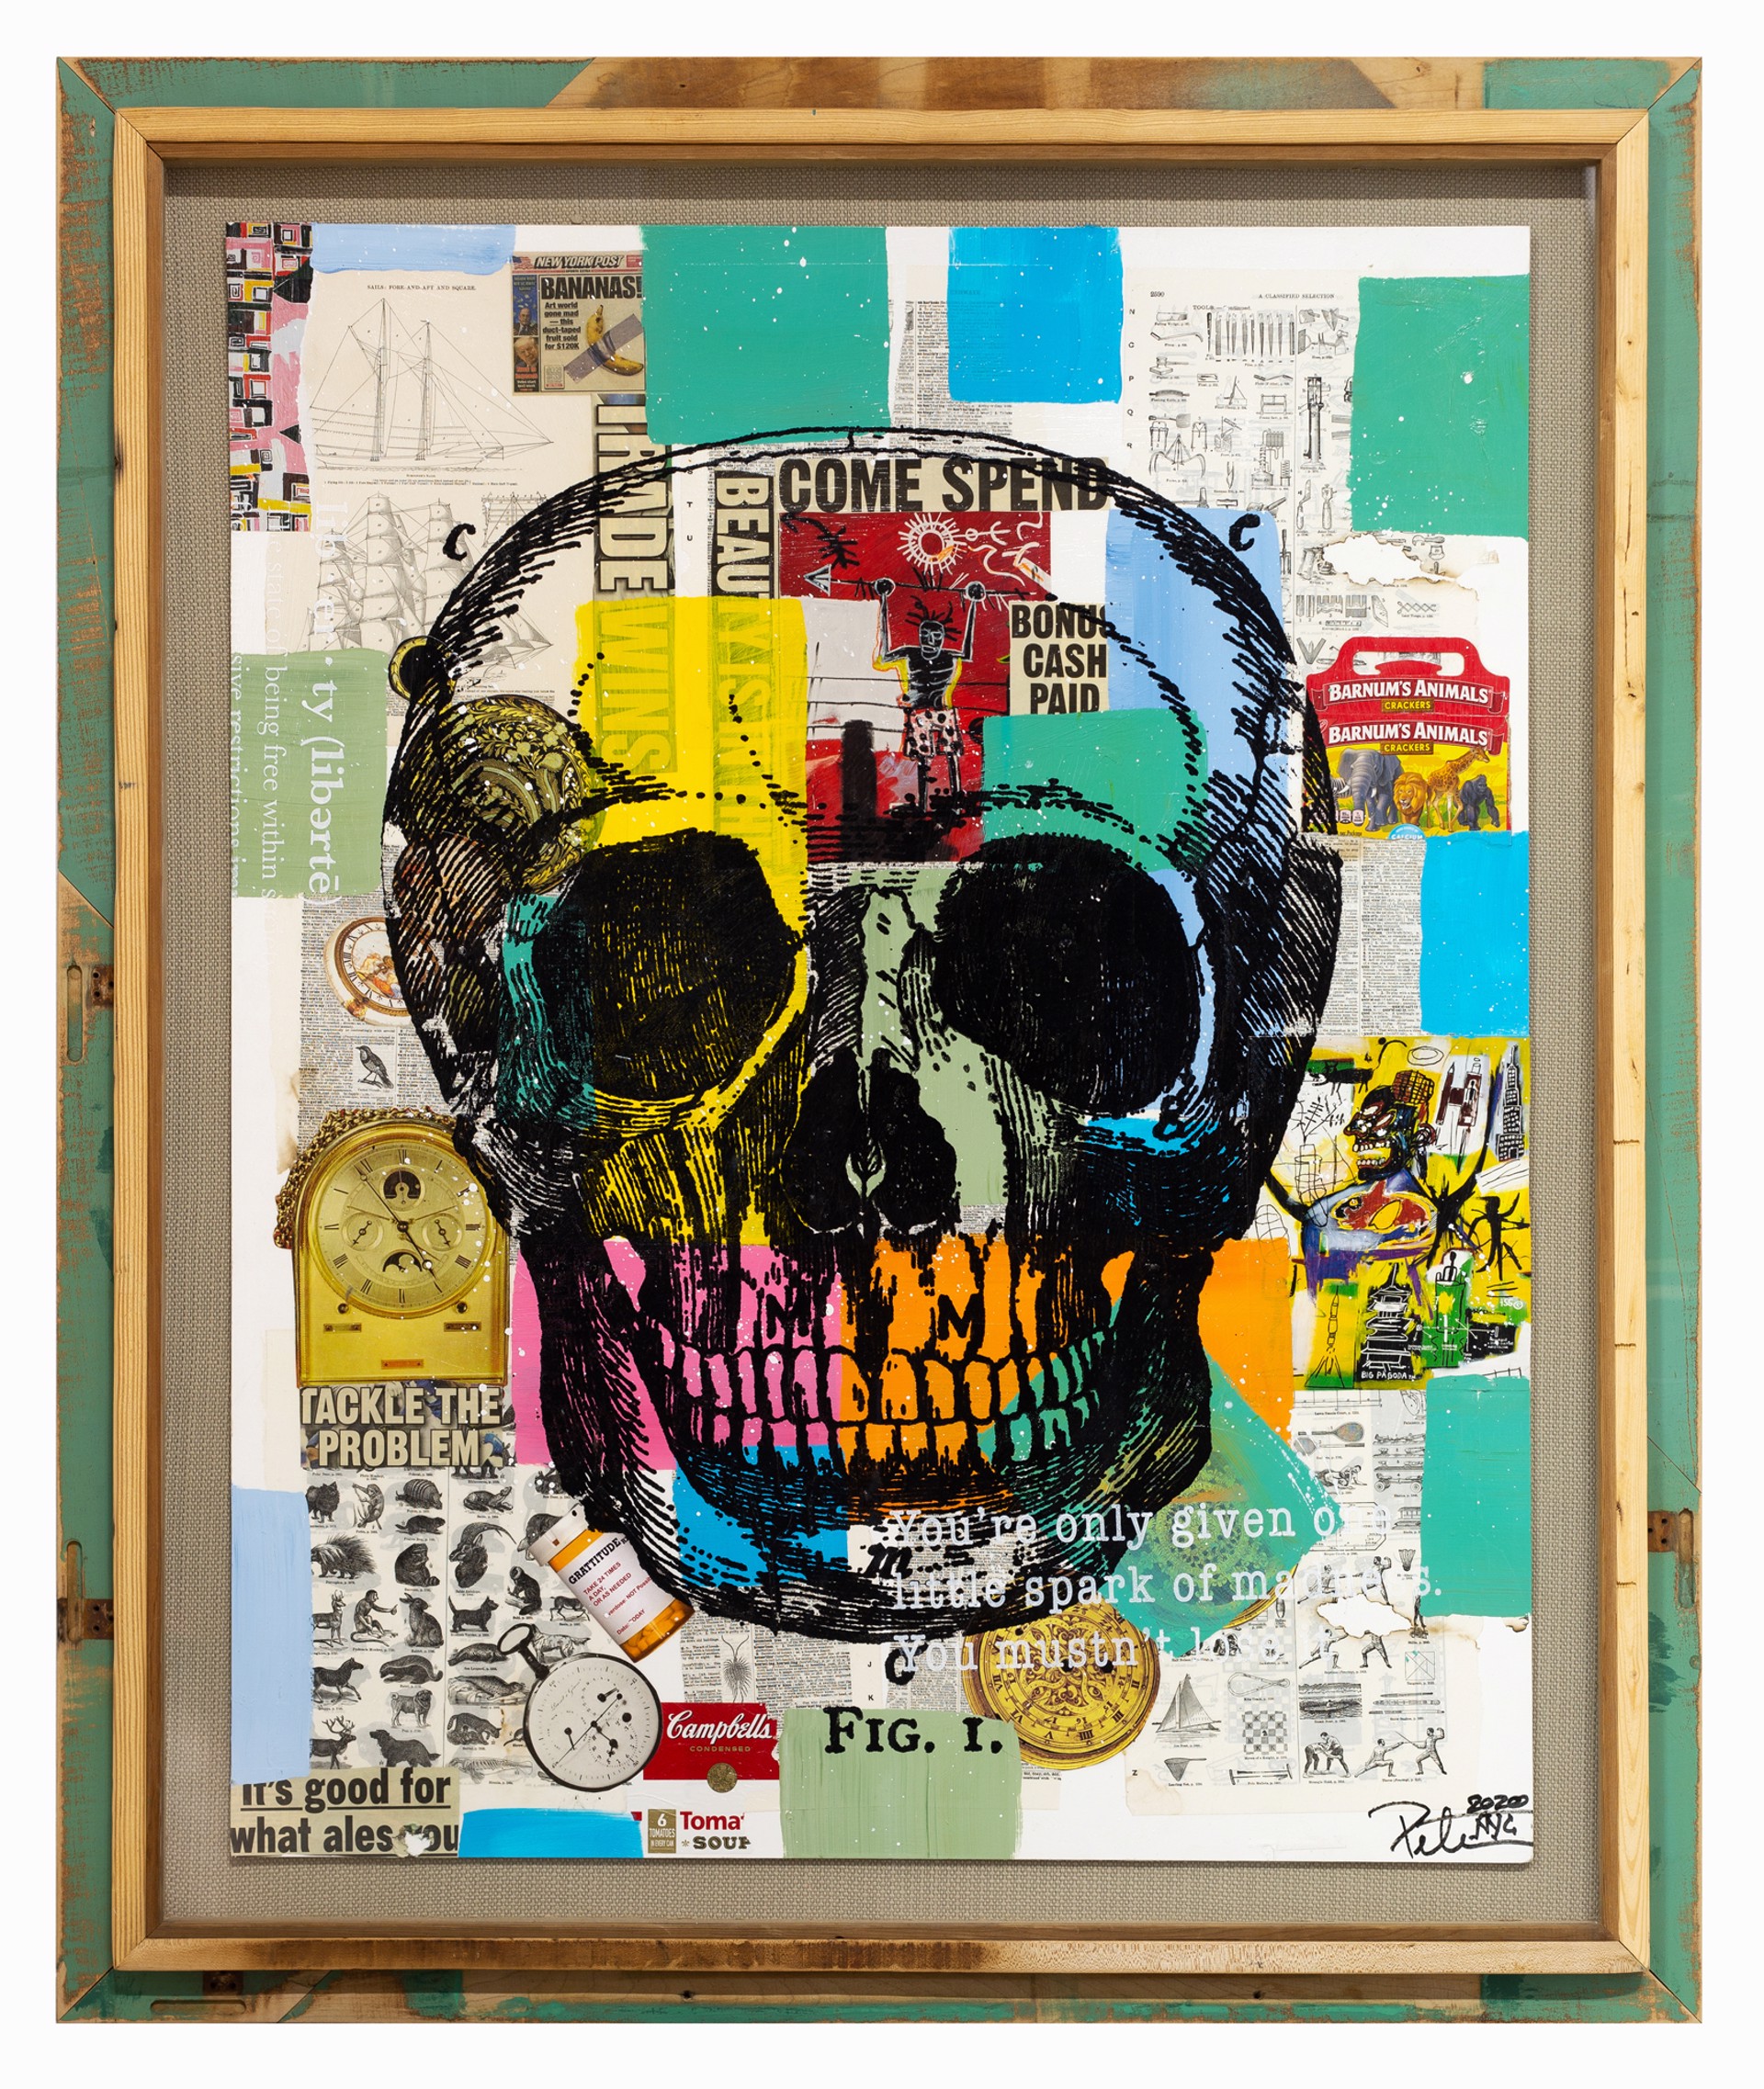 Skull (Come Spend On The Brain) by Peter Tunney